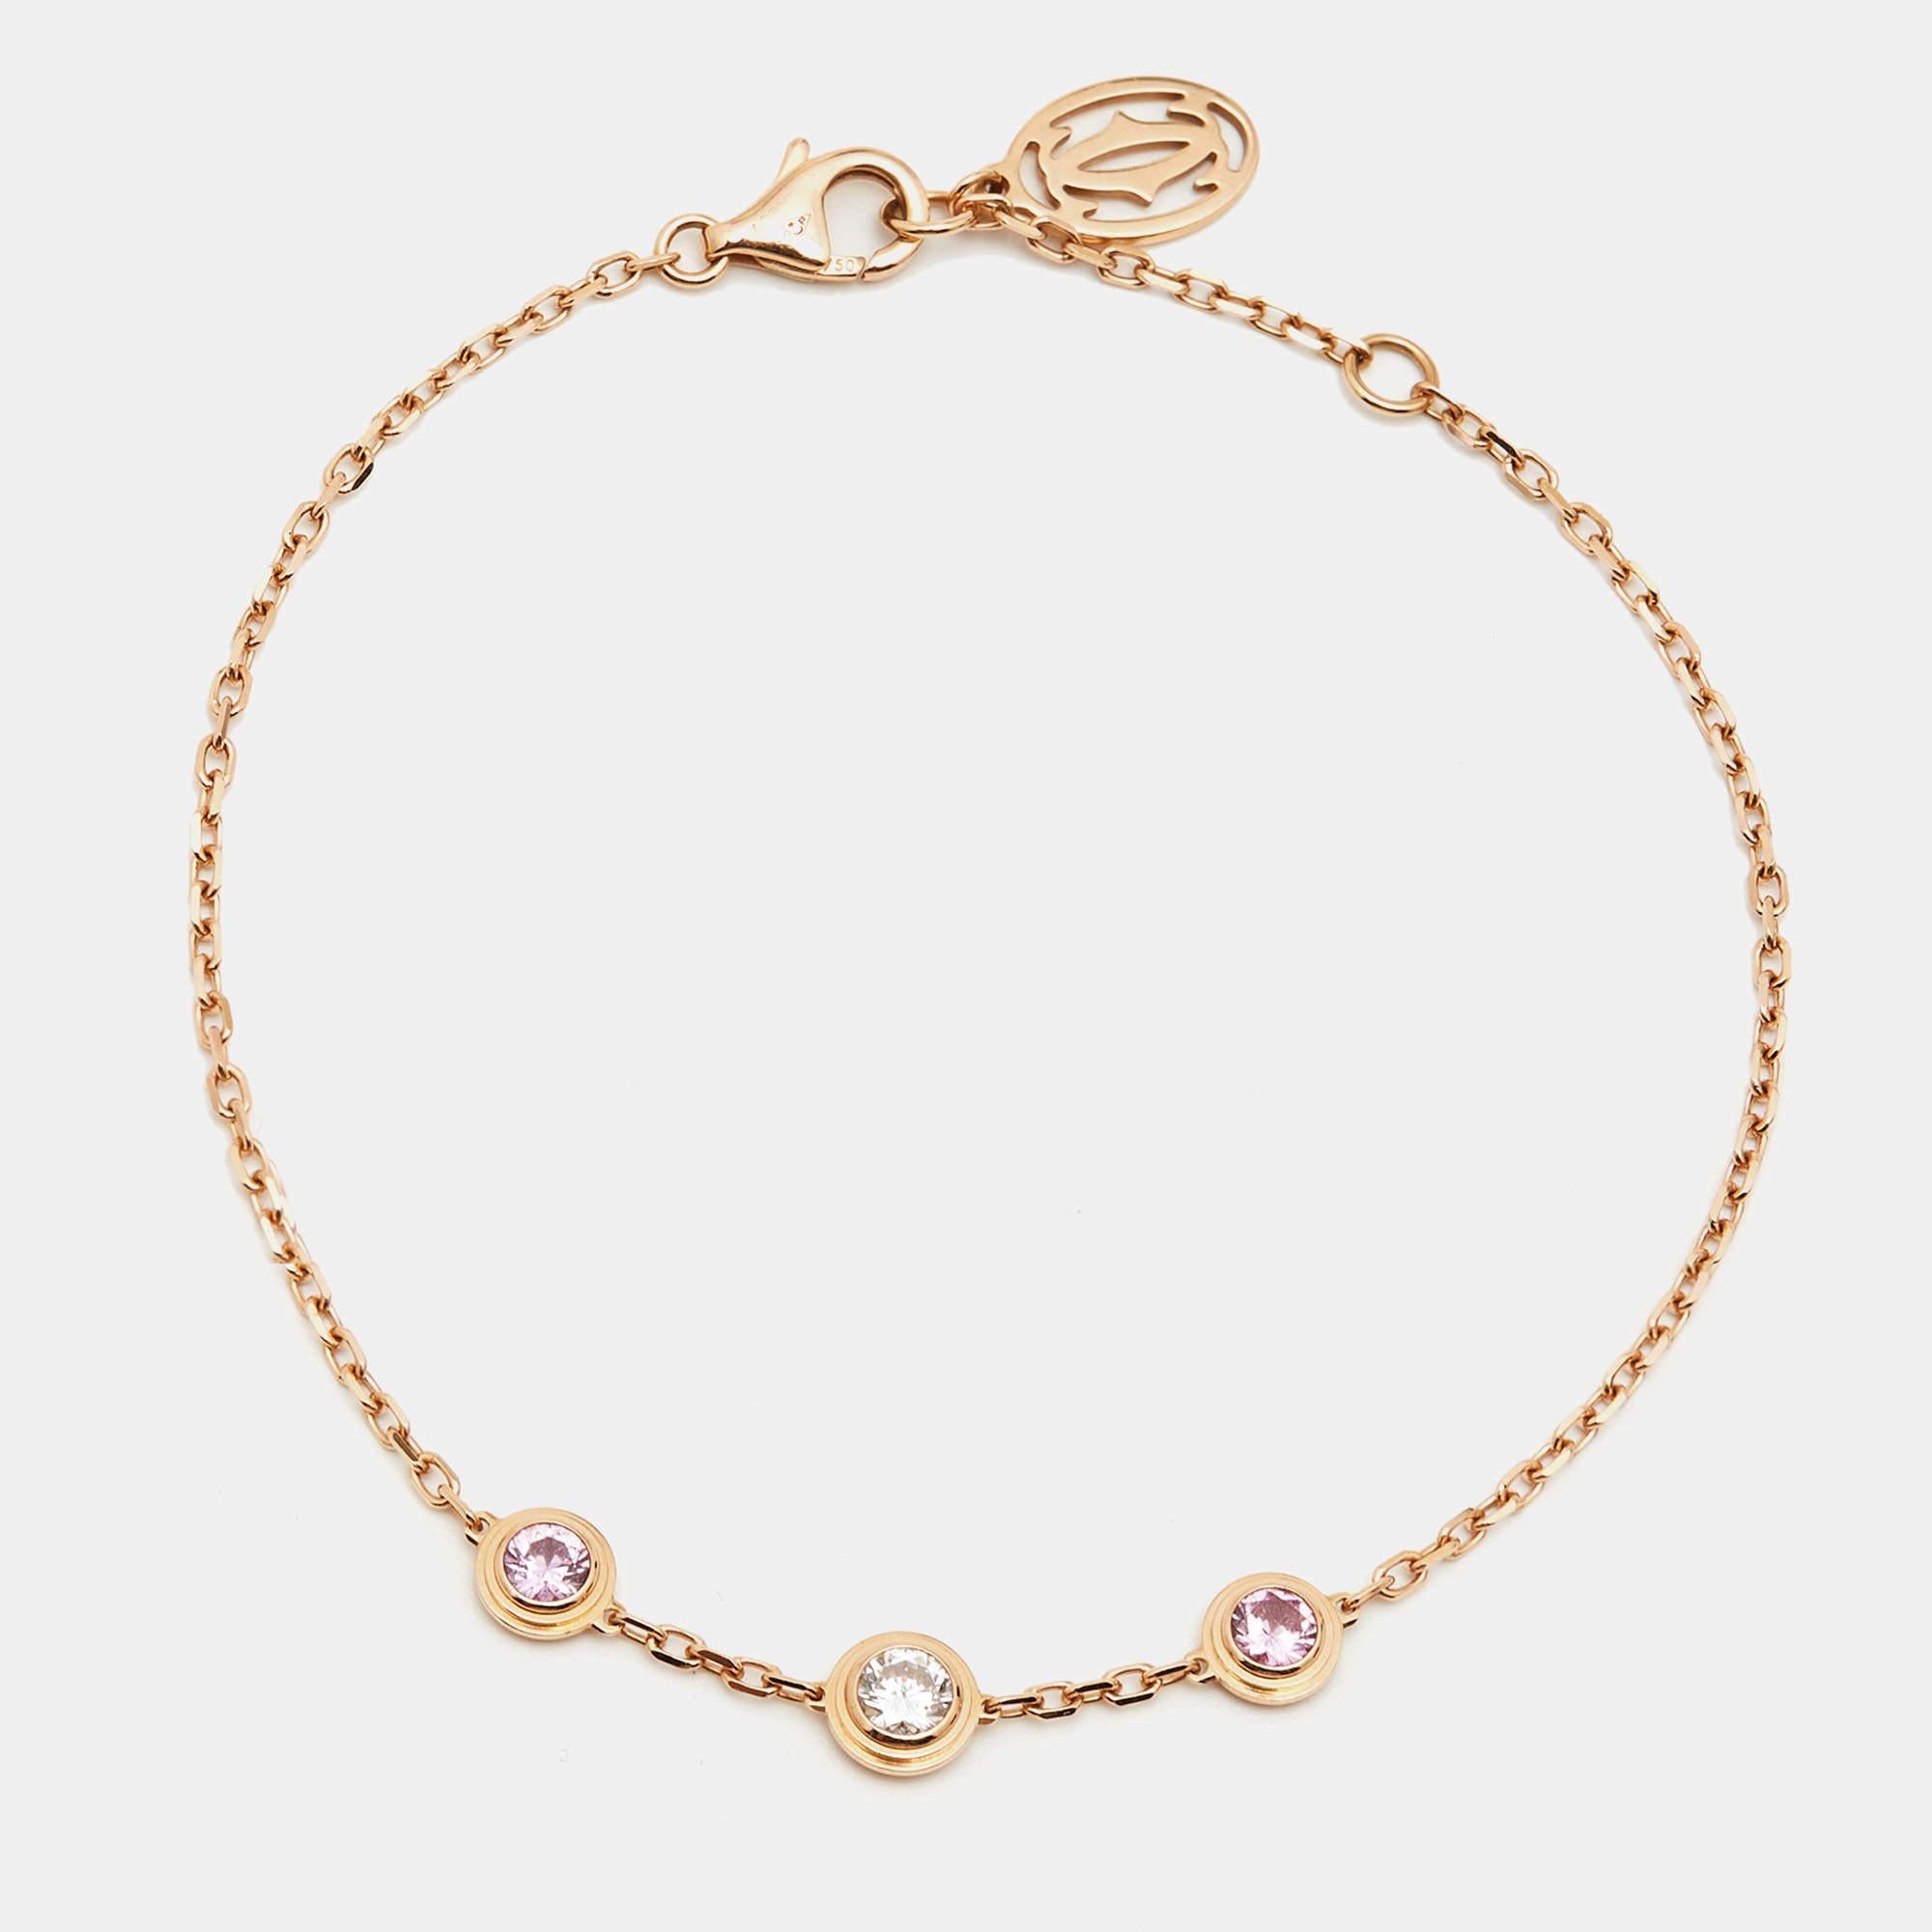 Cartier d'Amour collection has pieces designed with wearability in mind to act as everyday symbols of love. From that exclusive line comes this necklace fashioned in 18k rose gold. The delicate chain is secured by a lobster clasp and highlighted by